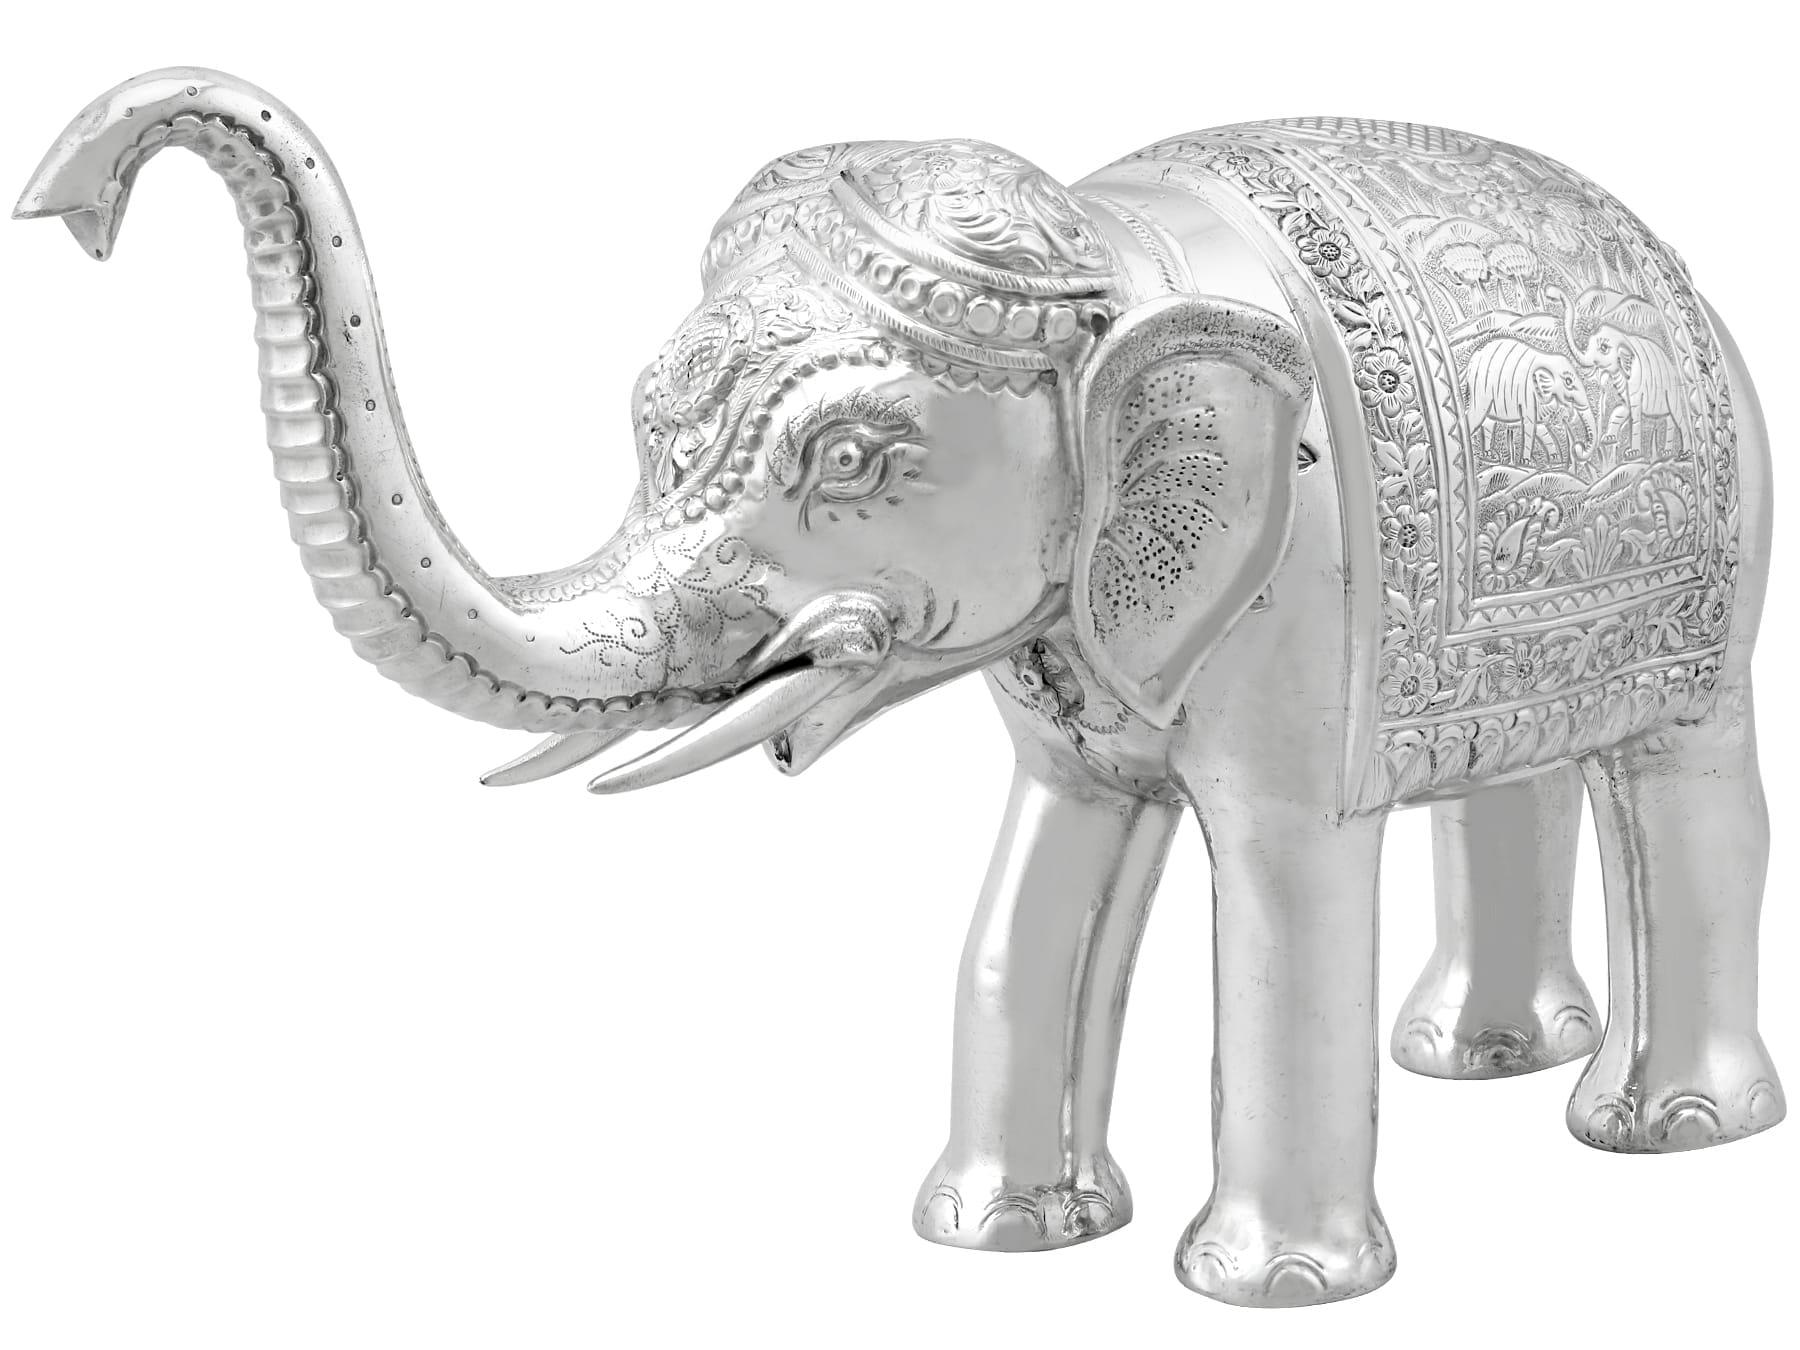 Mid-20th Century Vintage Indian Silver Elephant Table Ornament For Sale